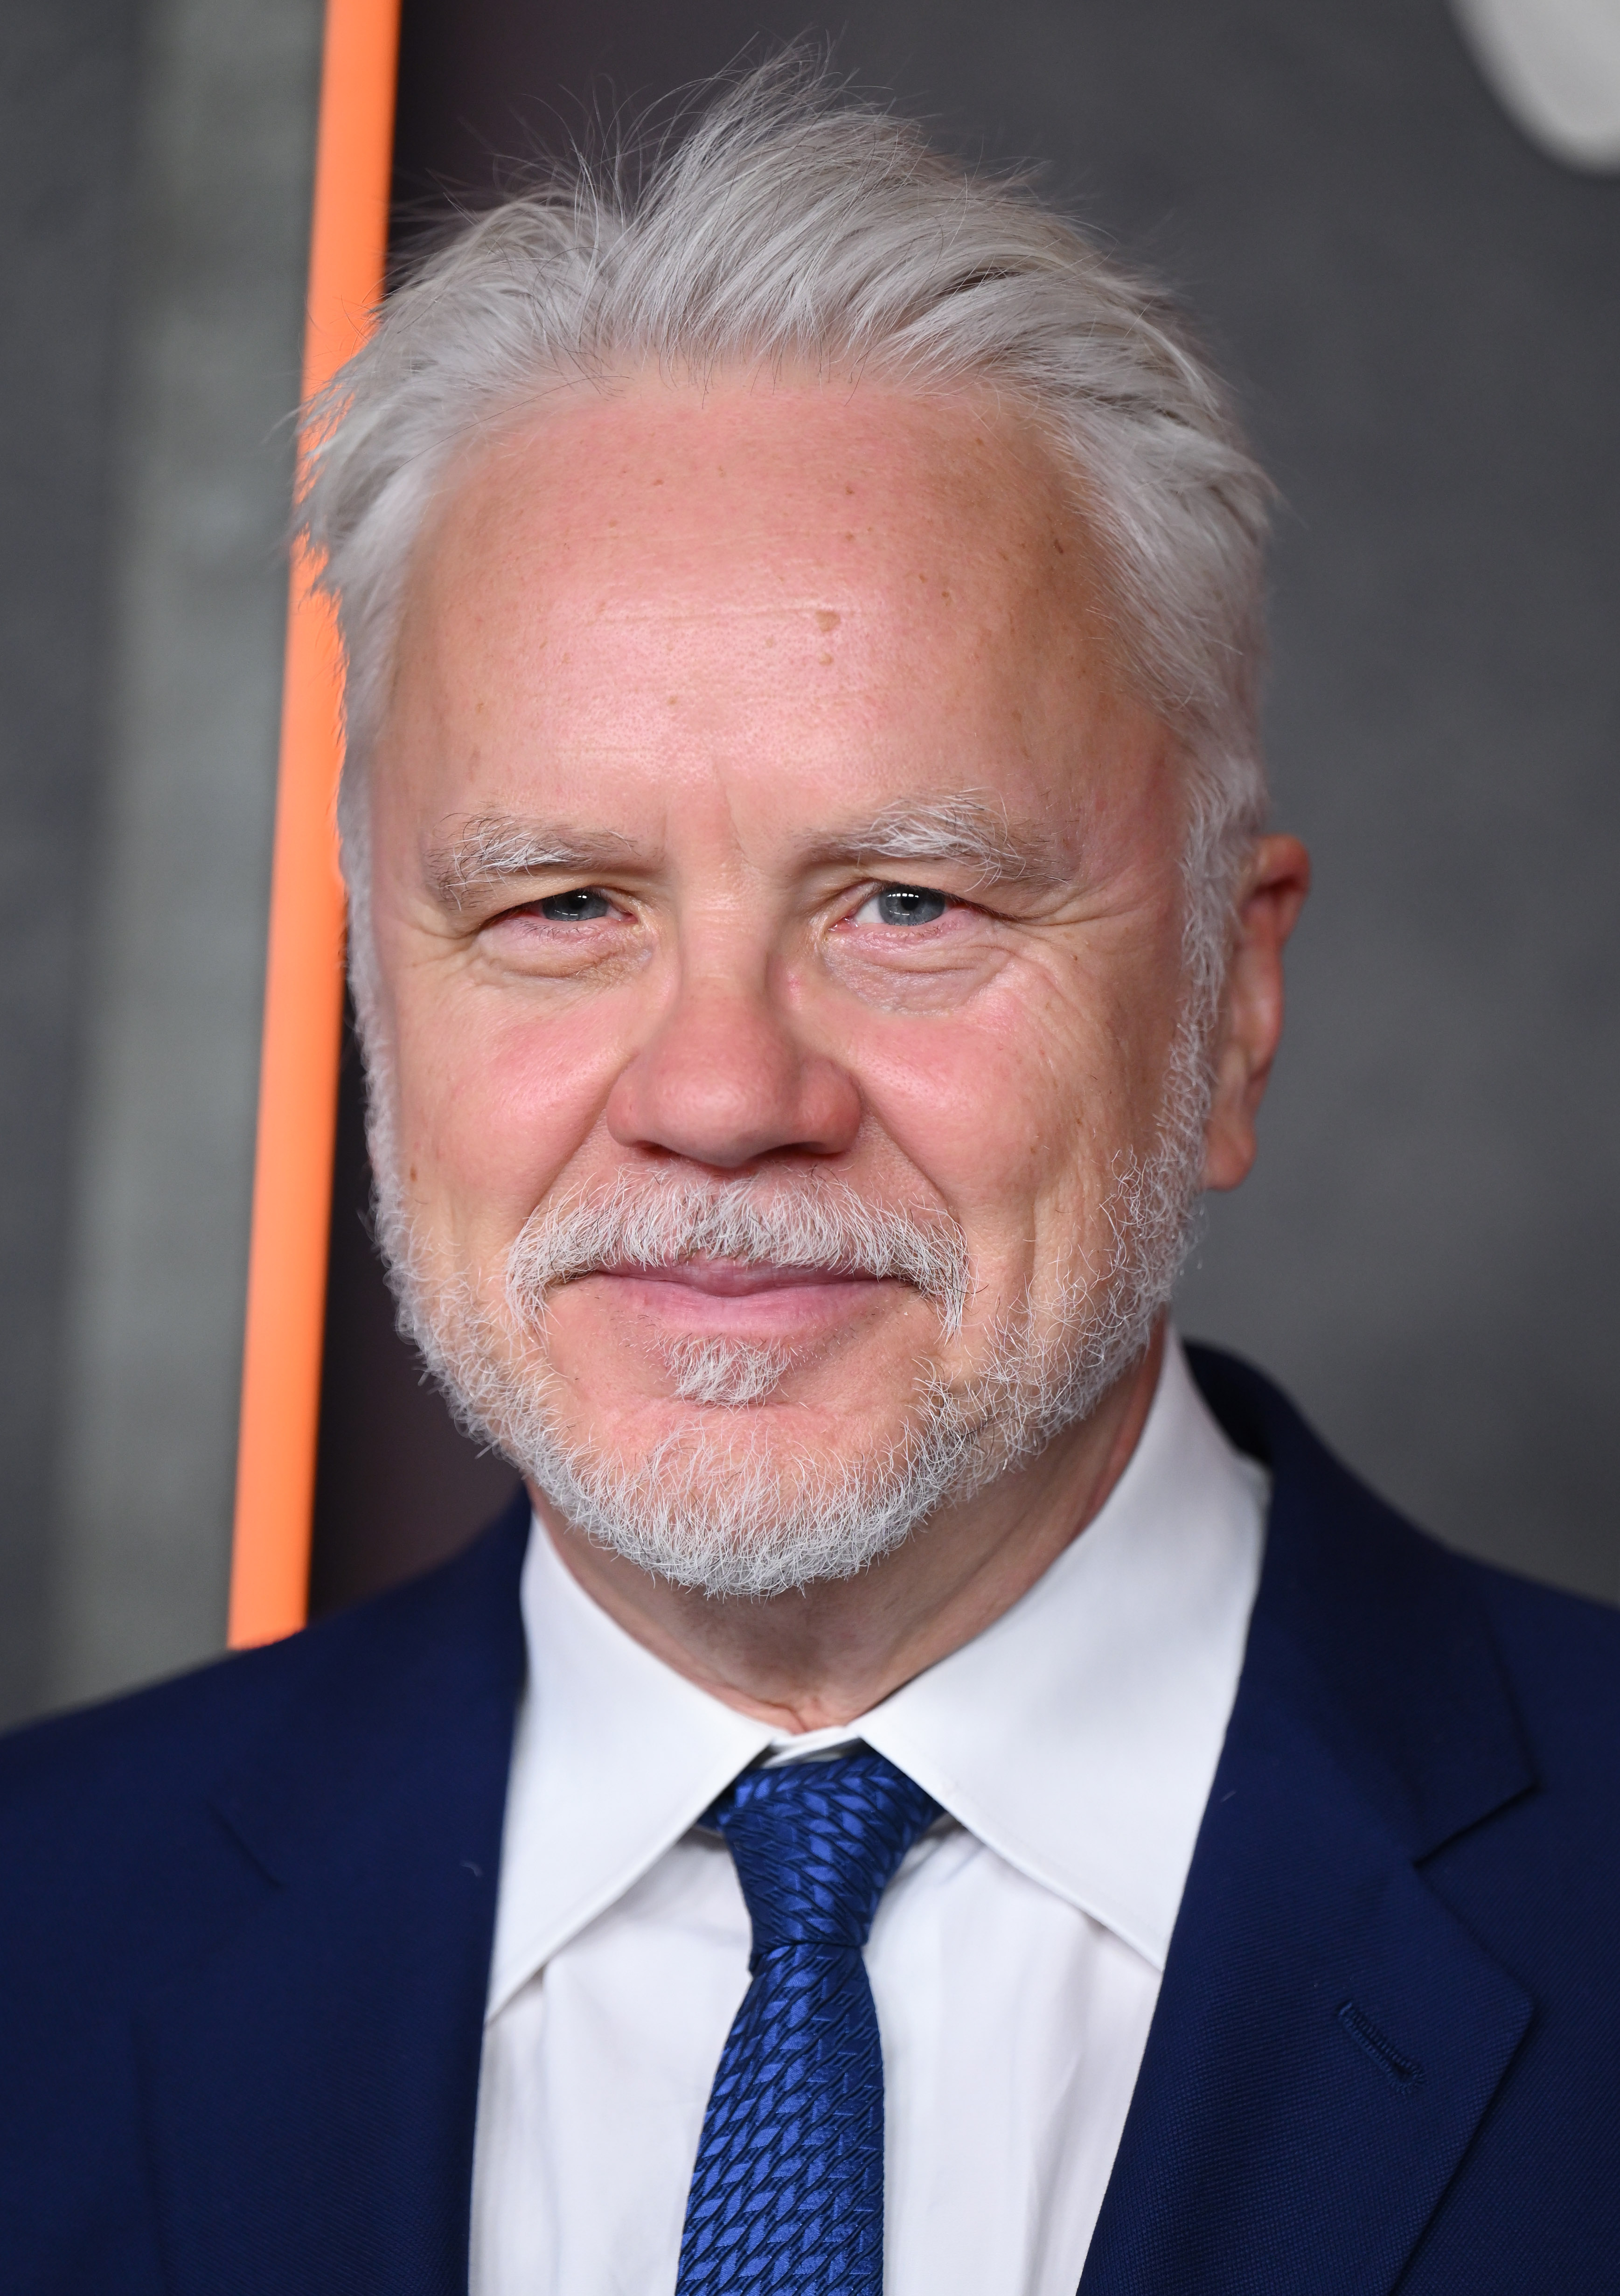 Tim Robbins at the premiere of "Silo" on April 25, 2023, in London, England. | Source: Getty Images